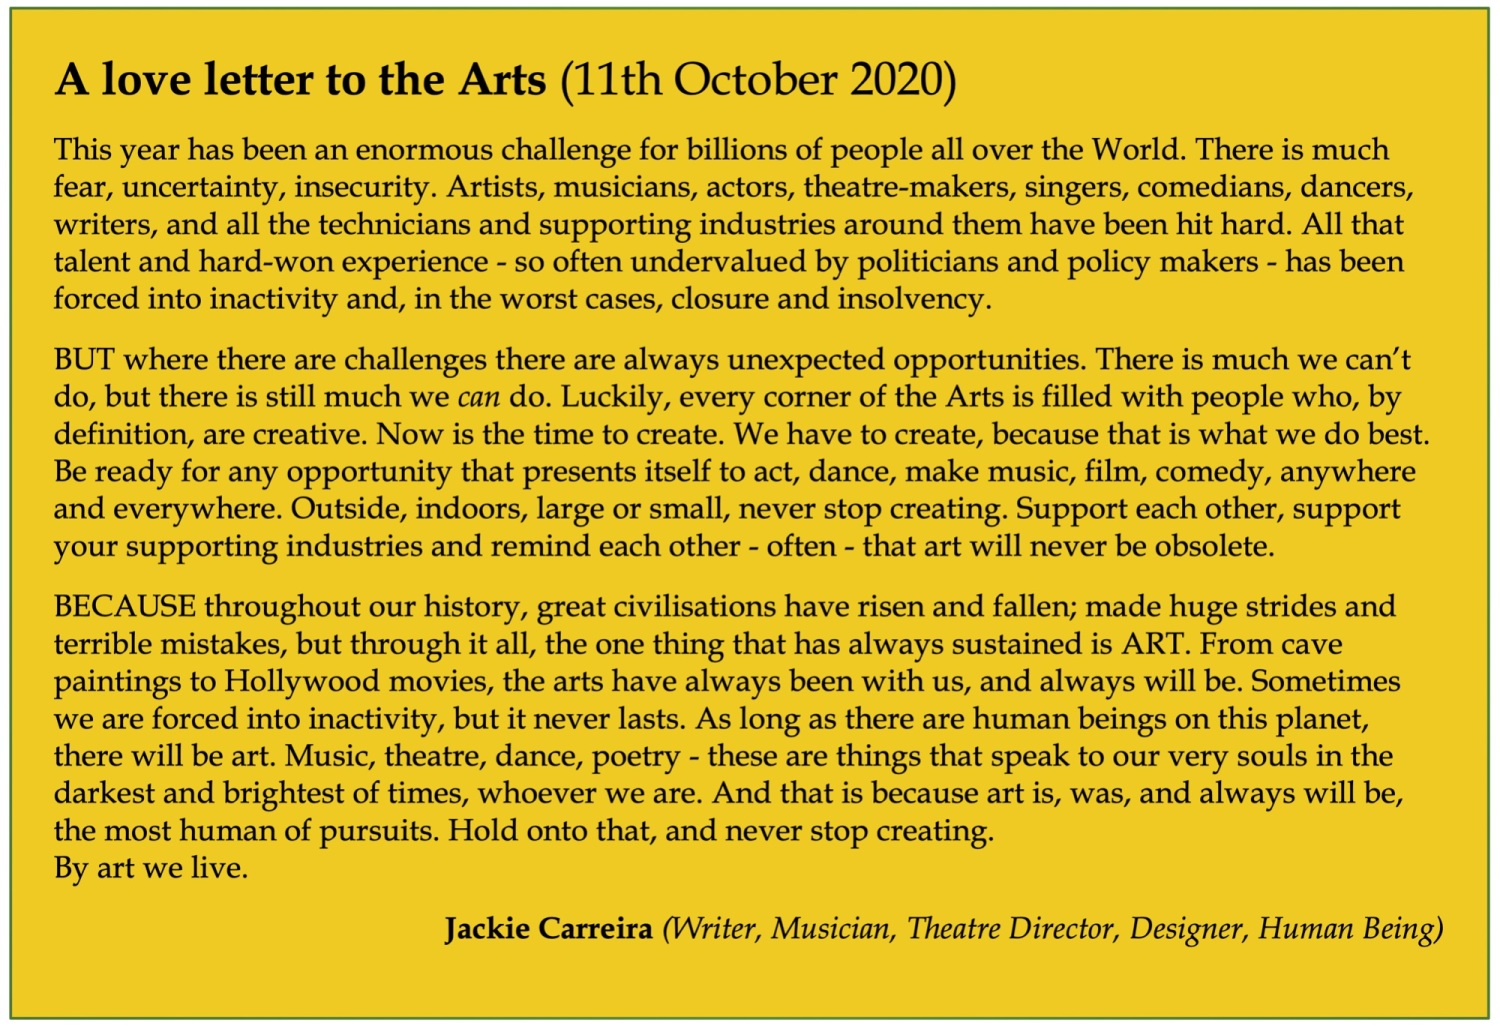 A love letter to the Arts